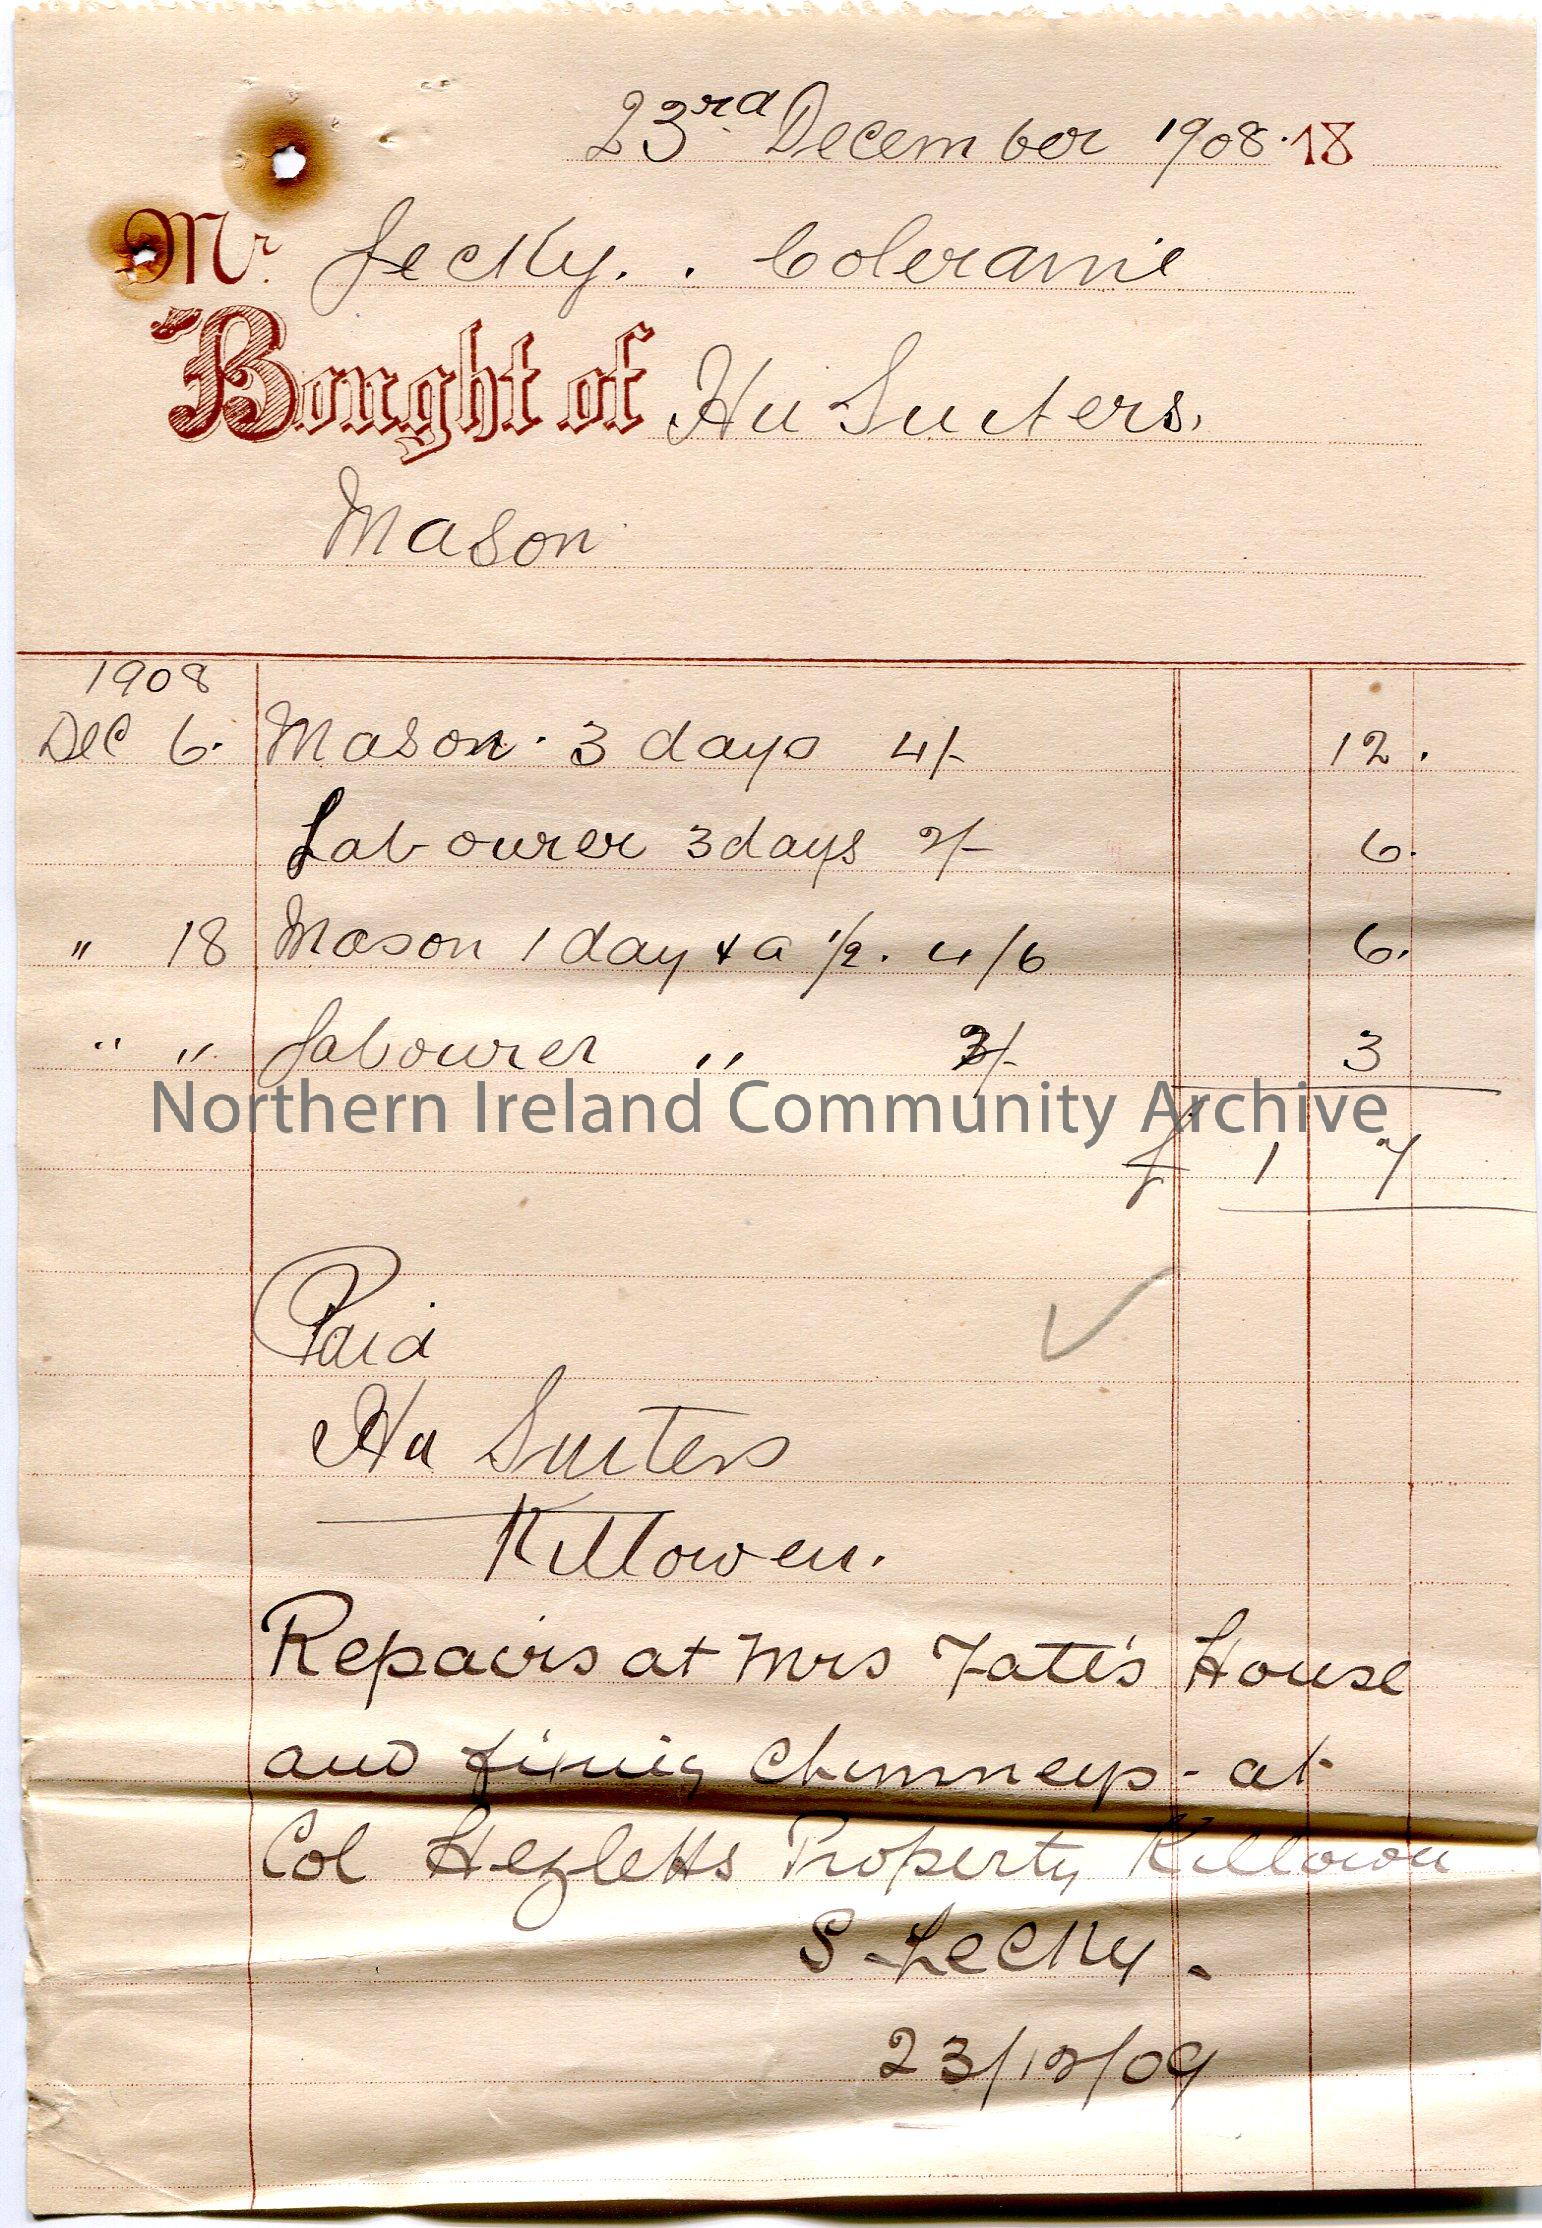 Handwritten receipt for the skills of a mason, repairs at Mrs Fate’s house and firing chimneys at Col Hezlett’s [Hezlet] property at Killowen. Total o…